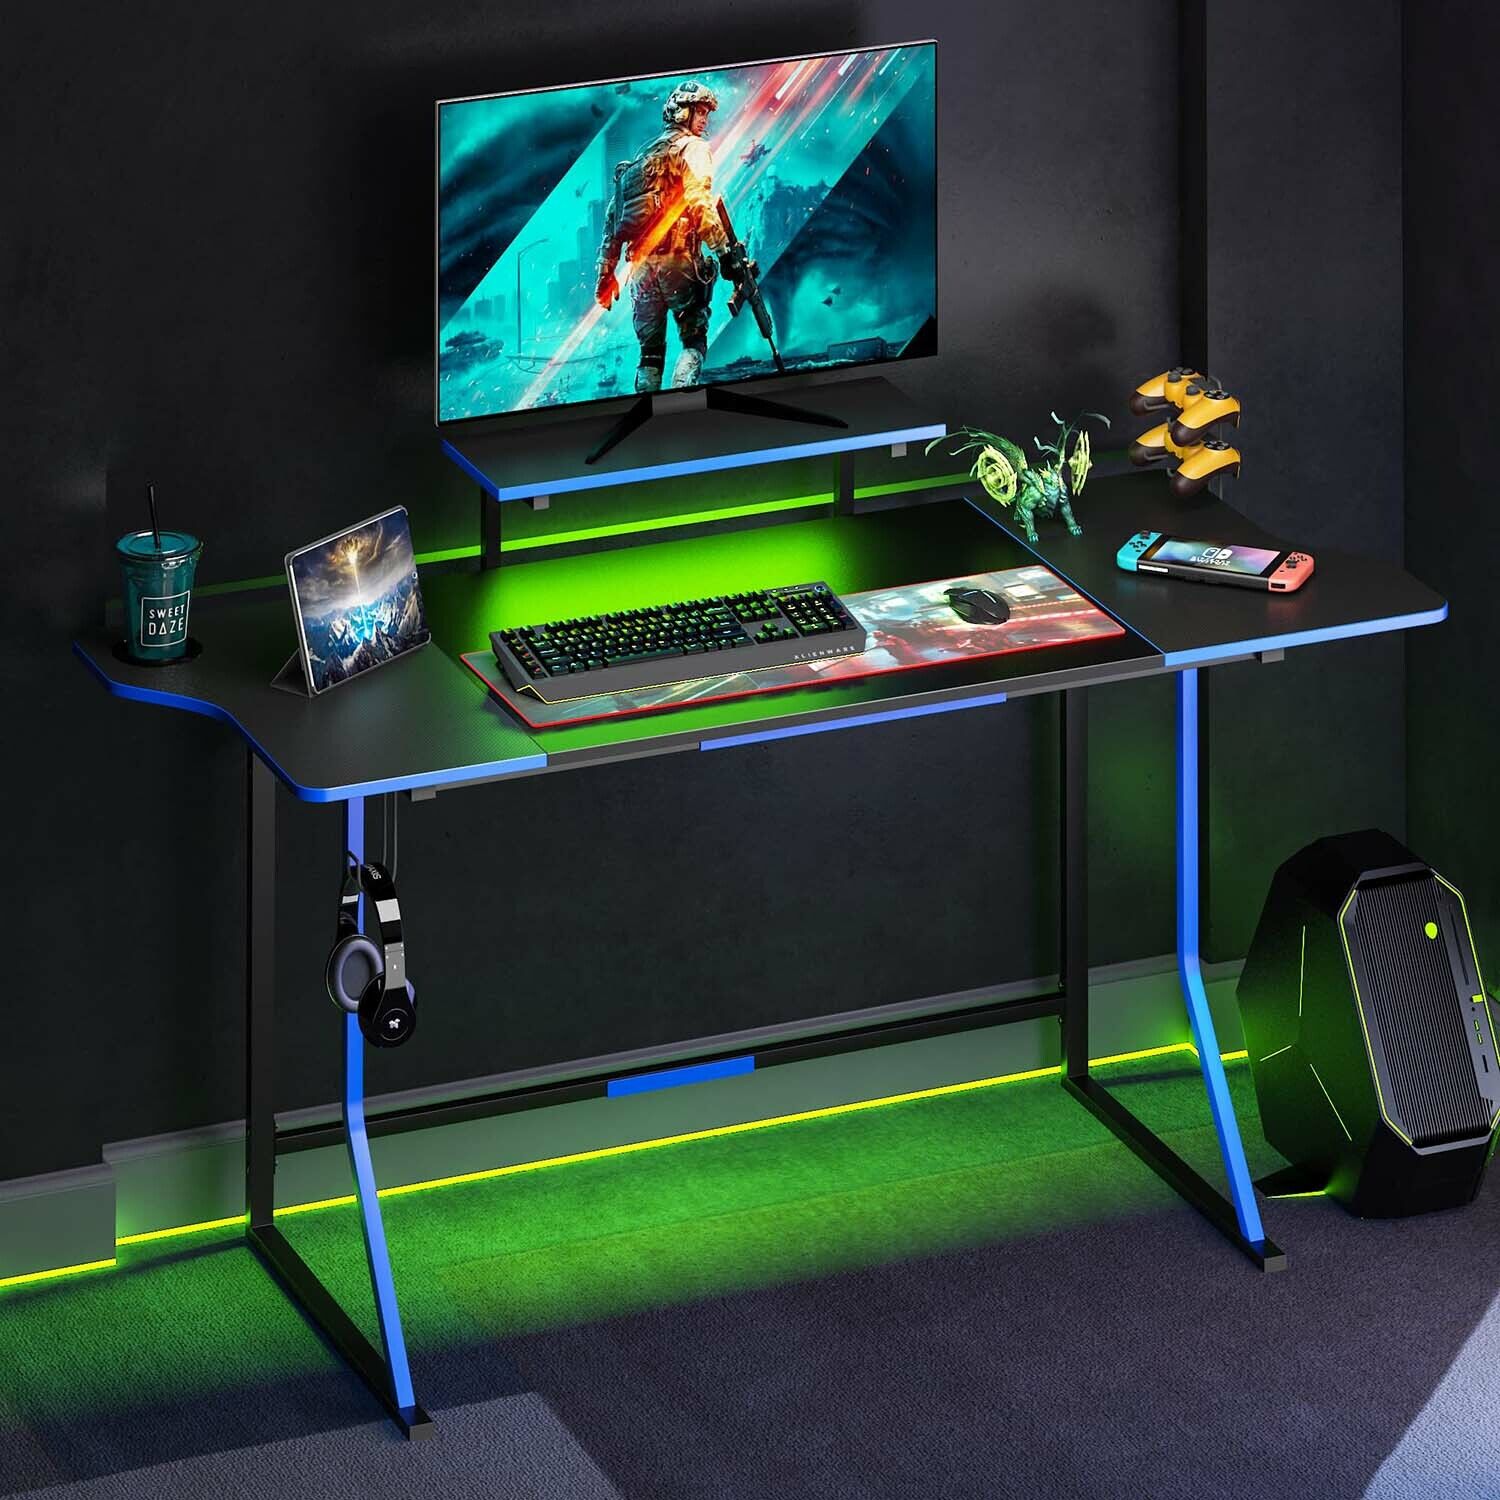 63" RGB LED Gaming Computer Desk PC Laptop Writing Workstation Home Office Table